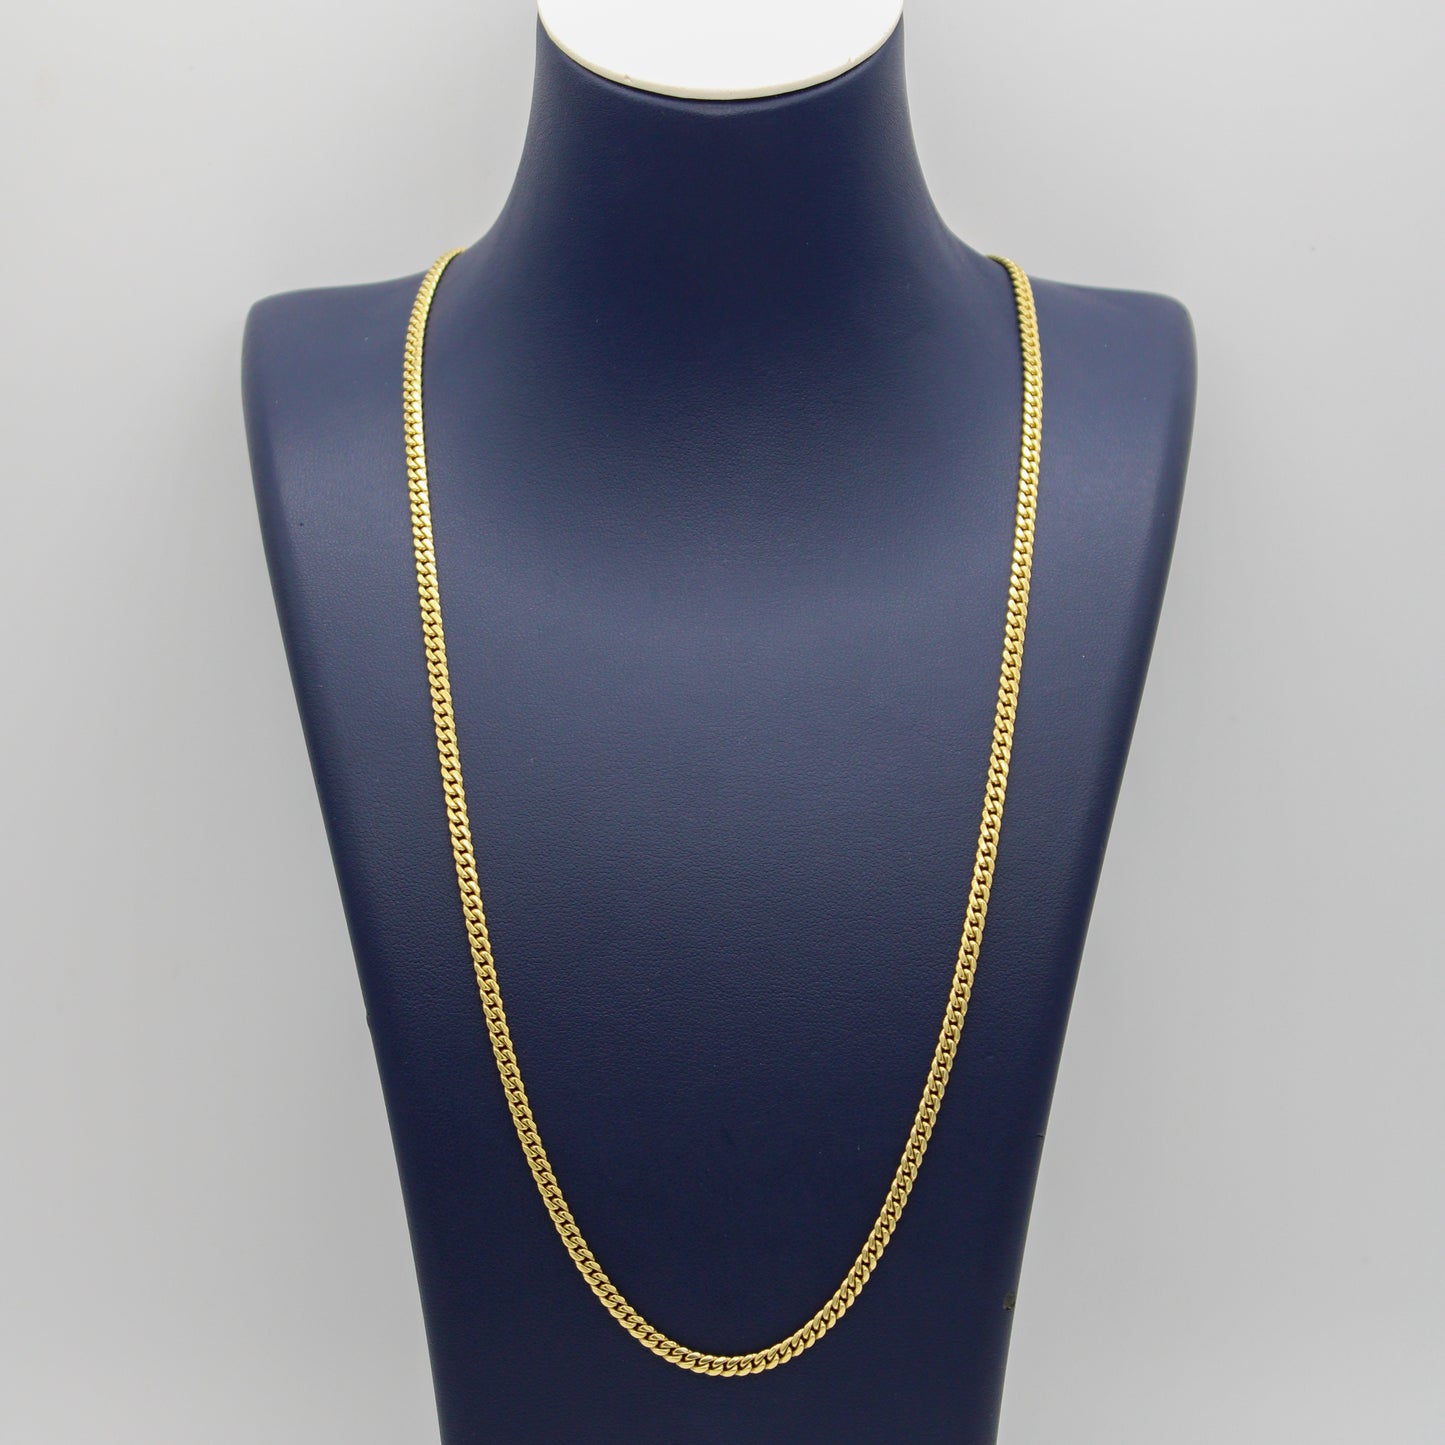 10K Solid Yellow Gold Cuban Link Chain From 3 mm to 5 mm